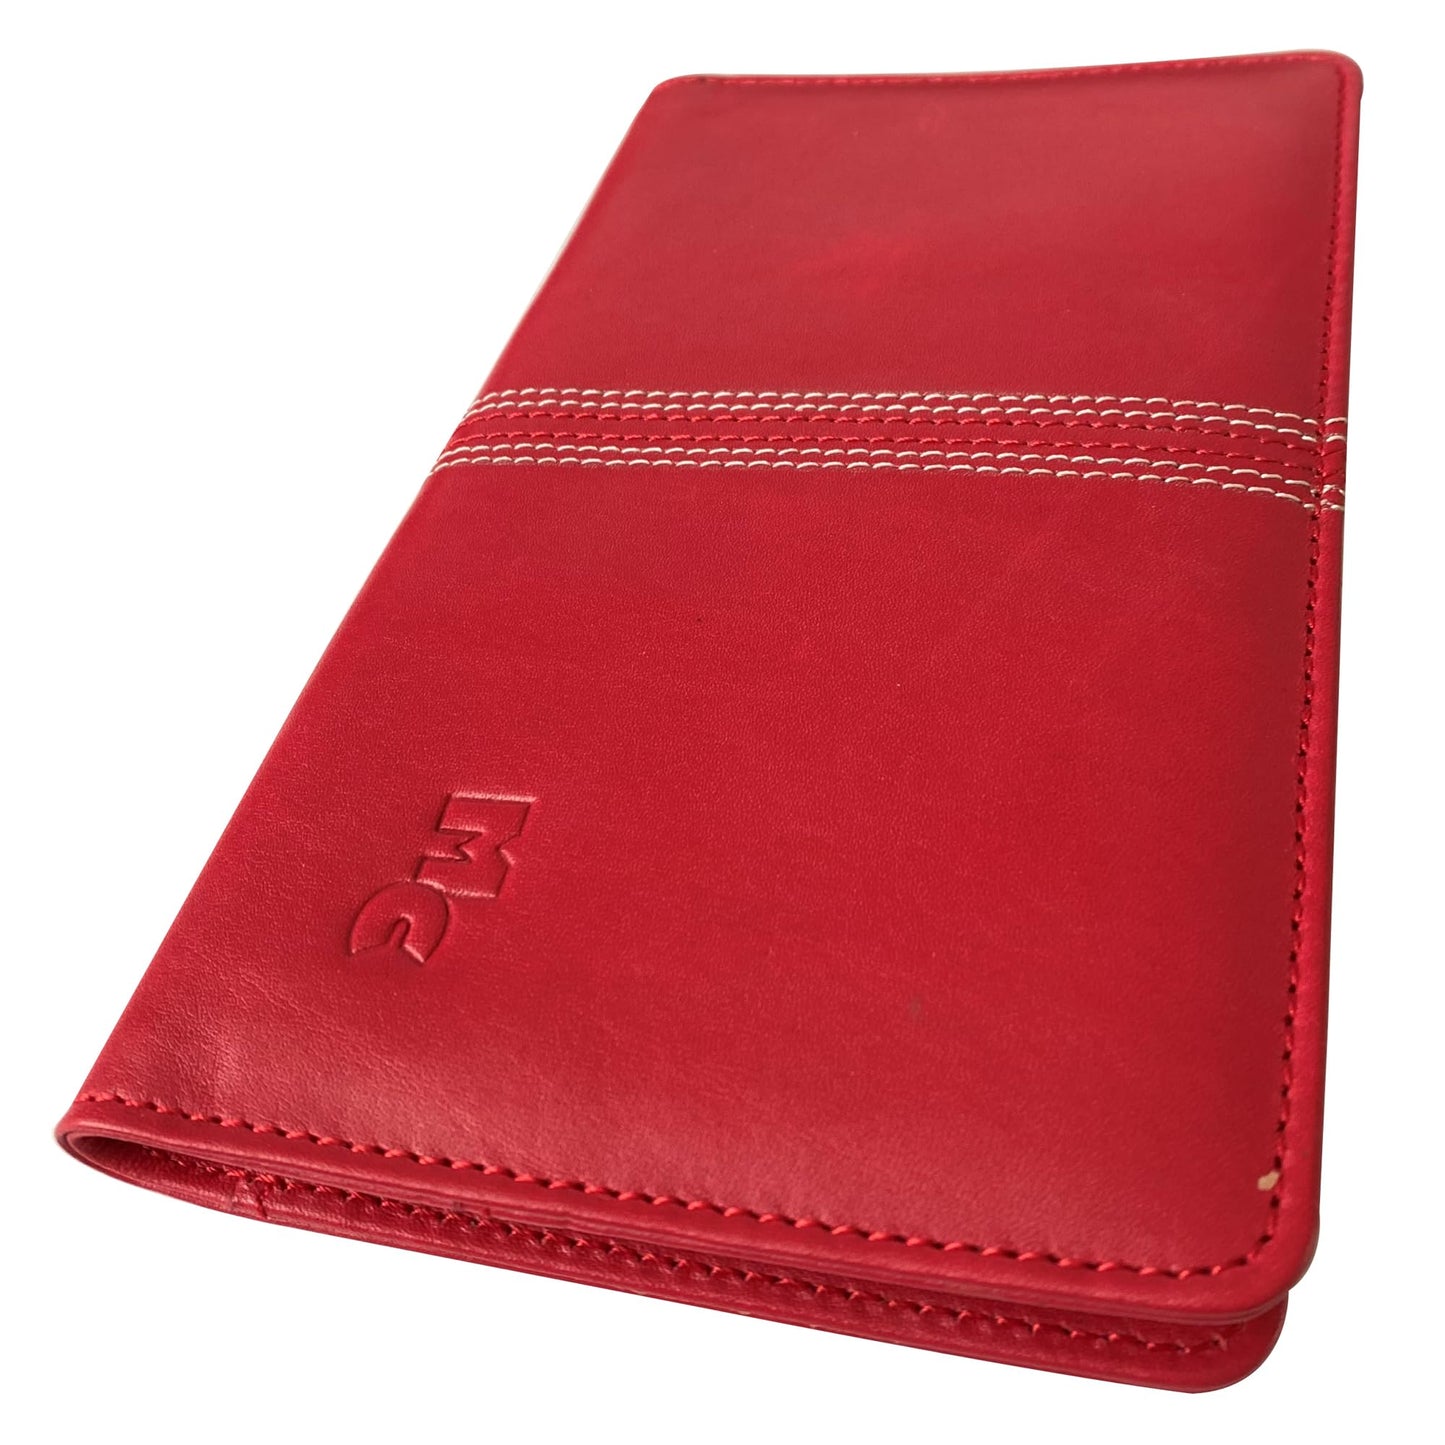 Embossed Real Cricket Leather Travel Wallet Passport Holder